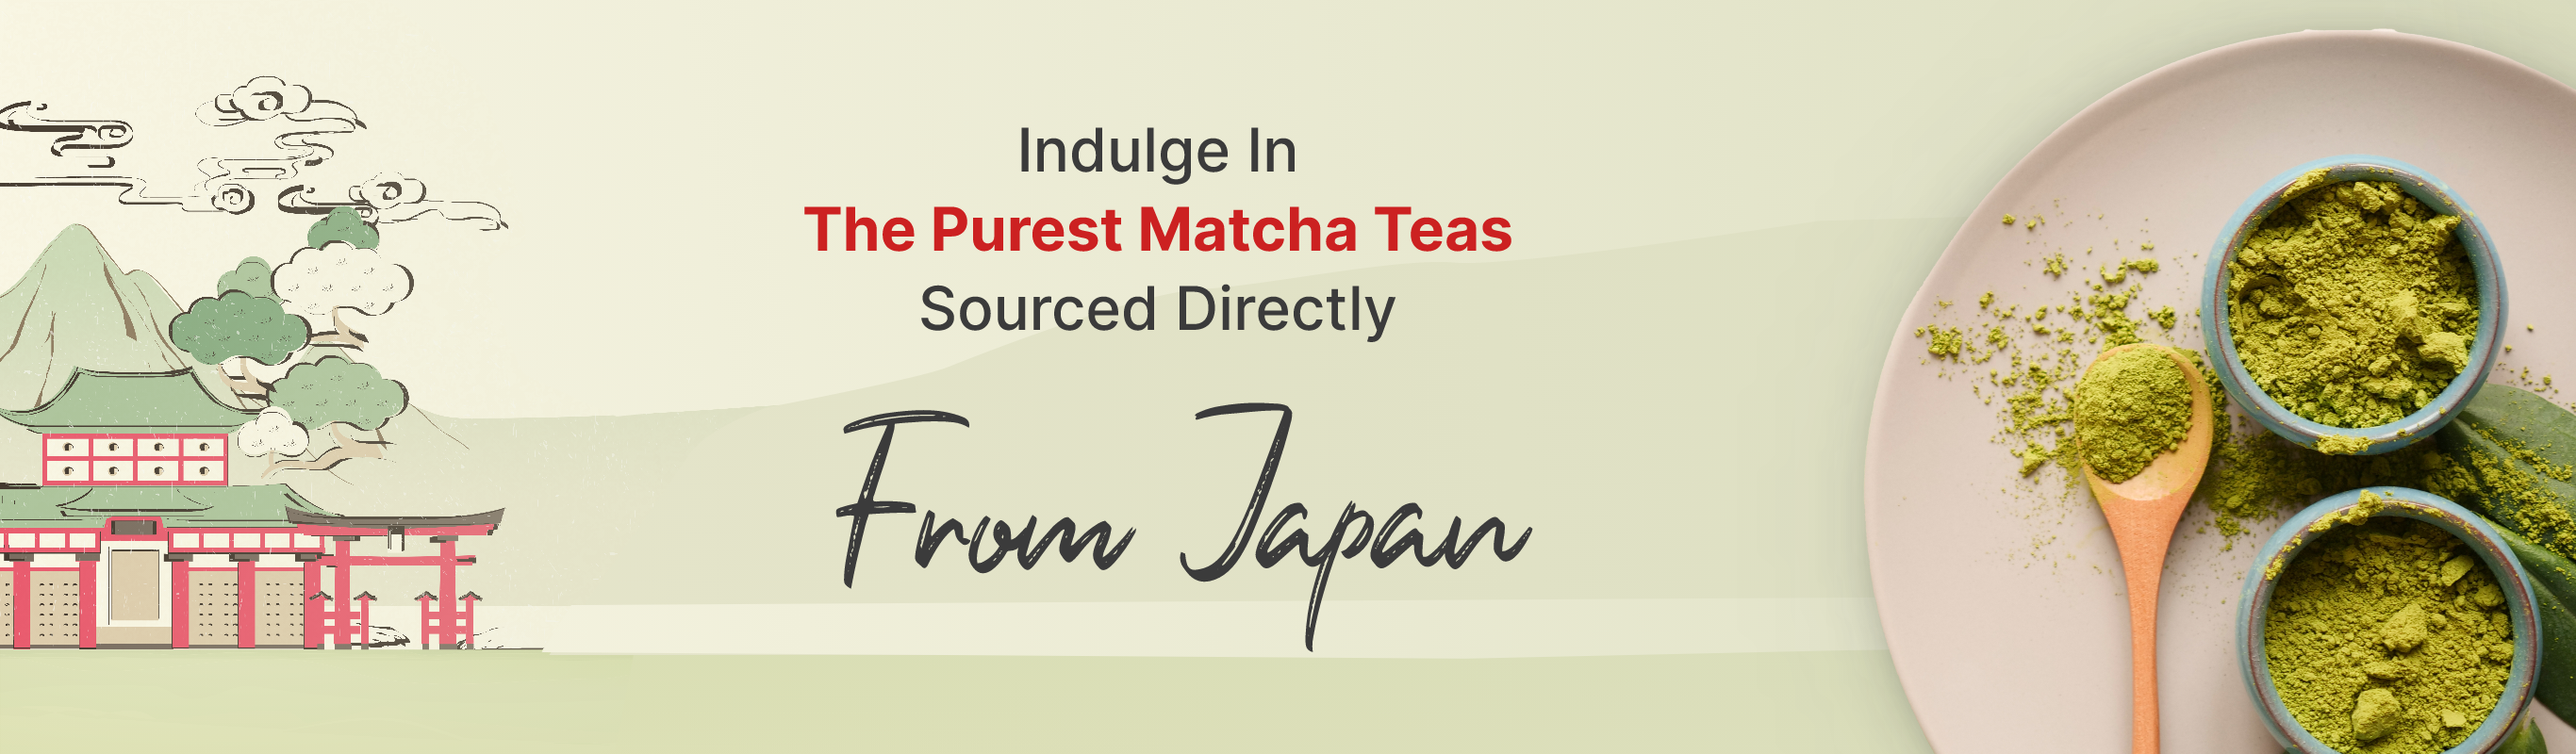 Indulge In The Purest Matcha Teas Sourced Directly From Japan